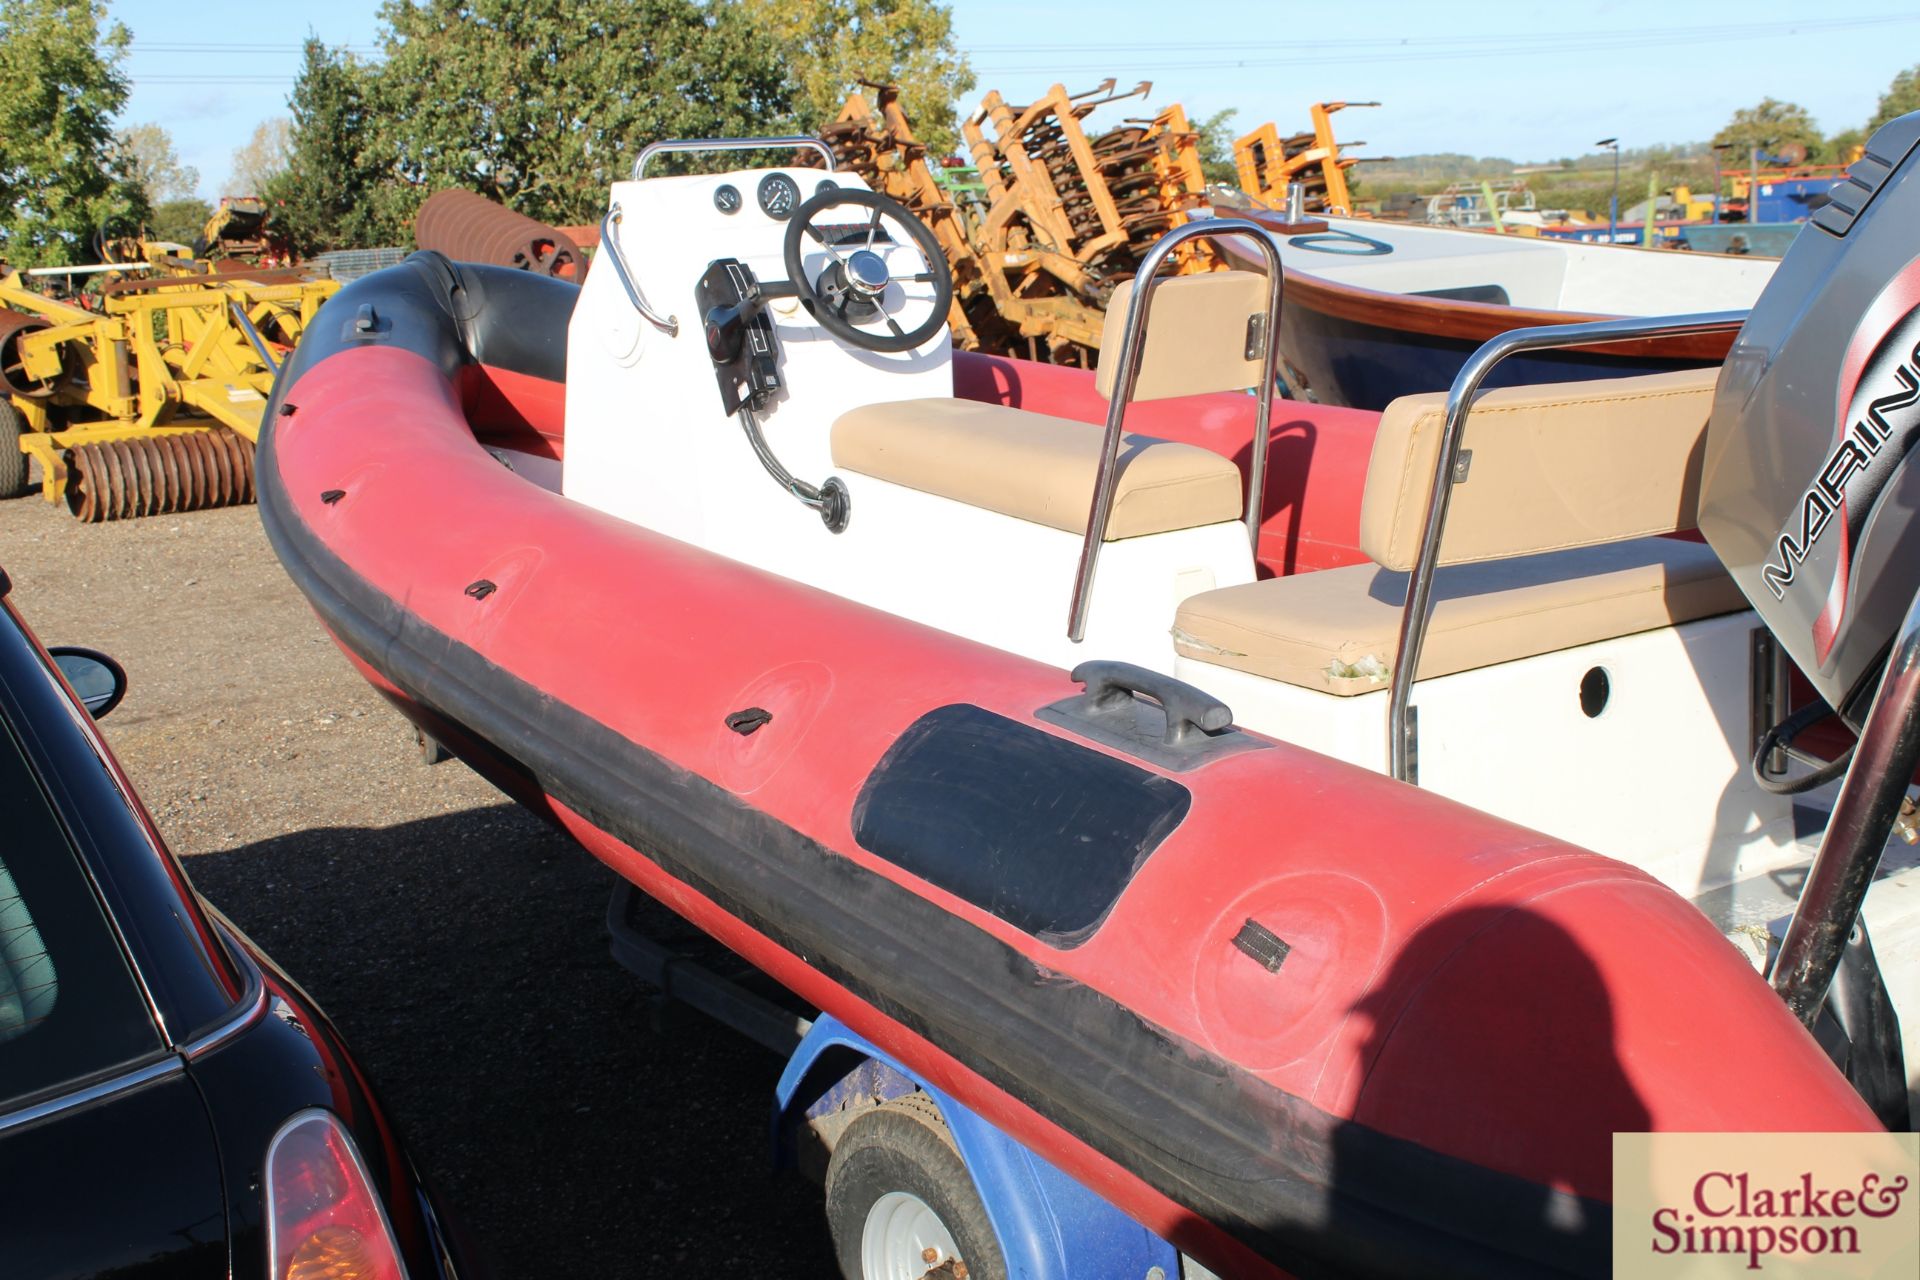 Humboldt 19ft 6in rigid inflatable boat. With Mariner 90HP oil injected 2 stroke outboard and - Image 6 of 23